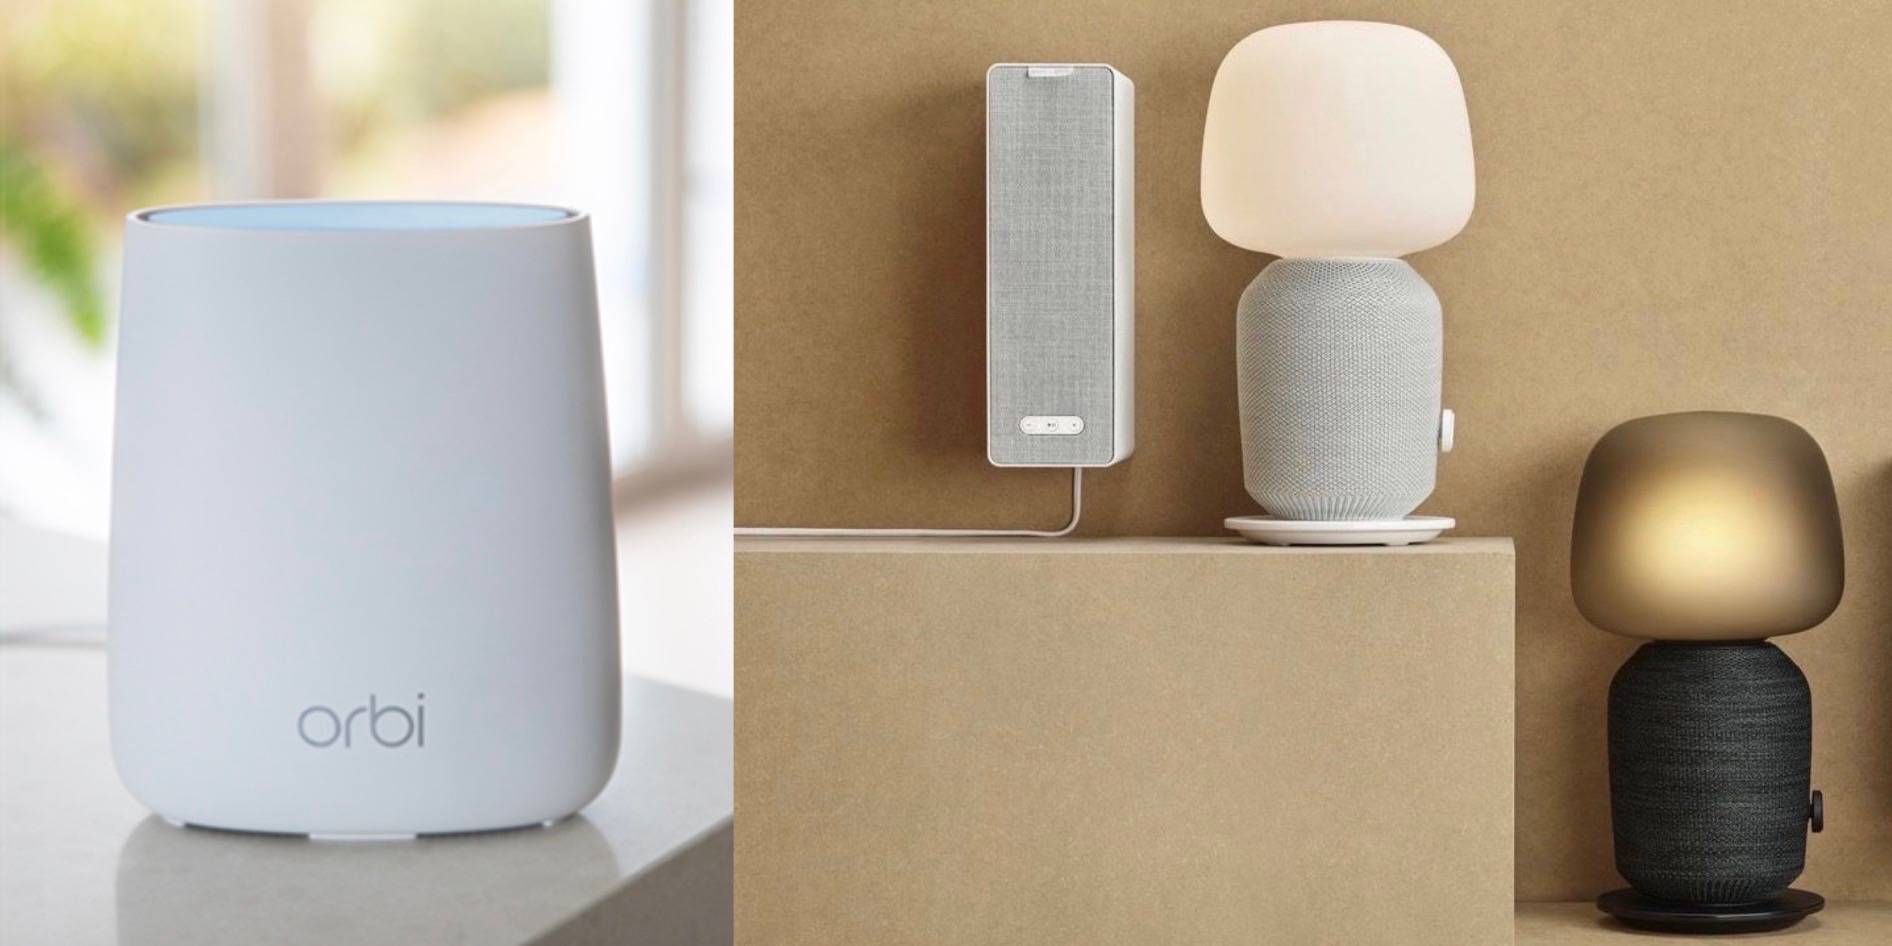 Orbi mesh Wi-Fi routers arrive at Apple Stores, Sonos with AirPlay 2 land at IKEA 9to5Mac